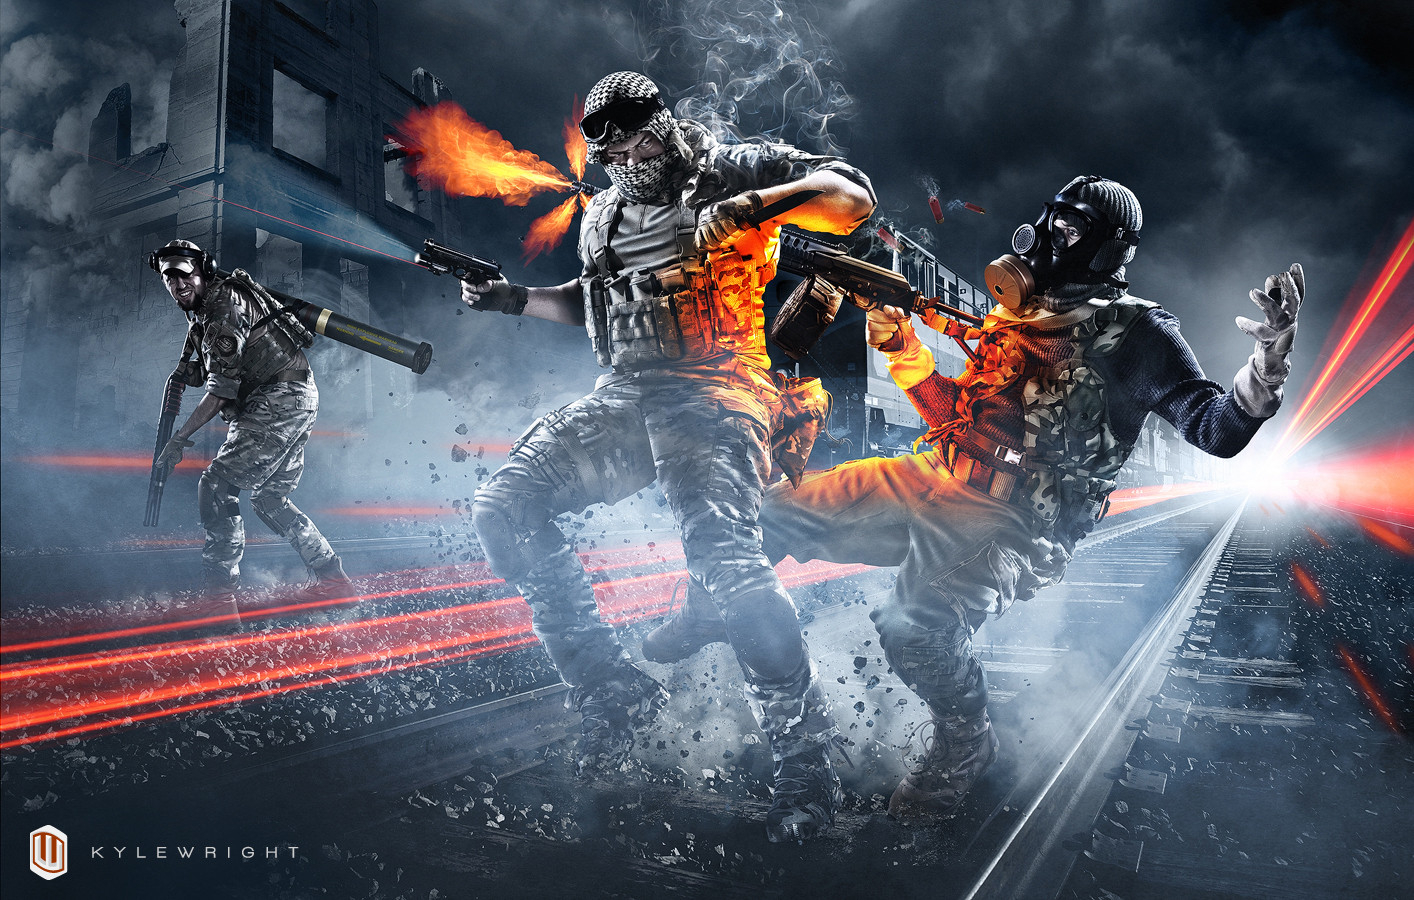 bf3 wallpaper,action adventure game,pc game,movie,cg artwork,games